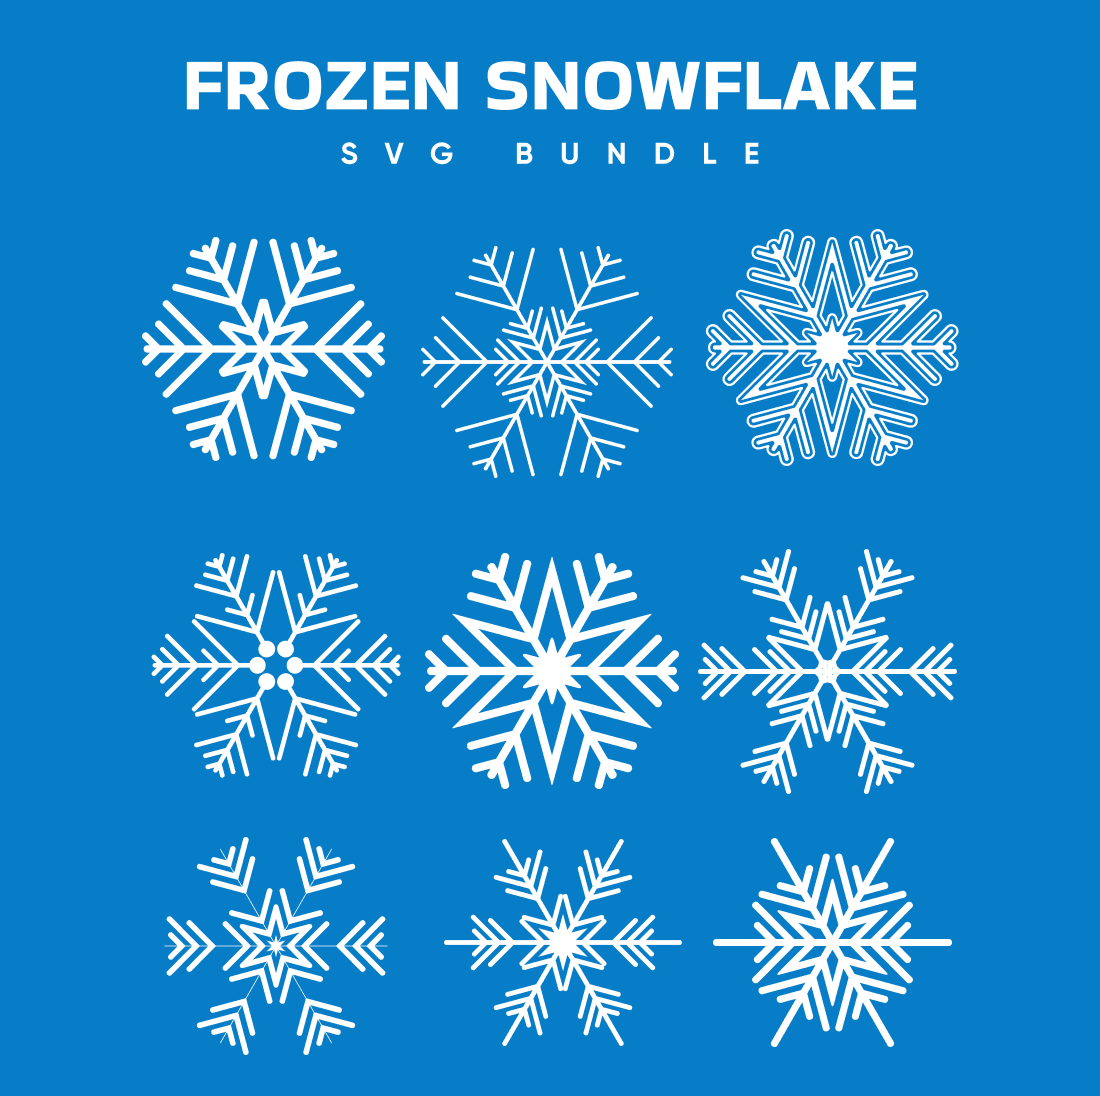 Frozen Snowflake SVG - main image preview.